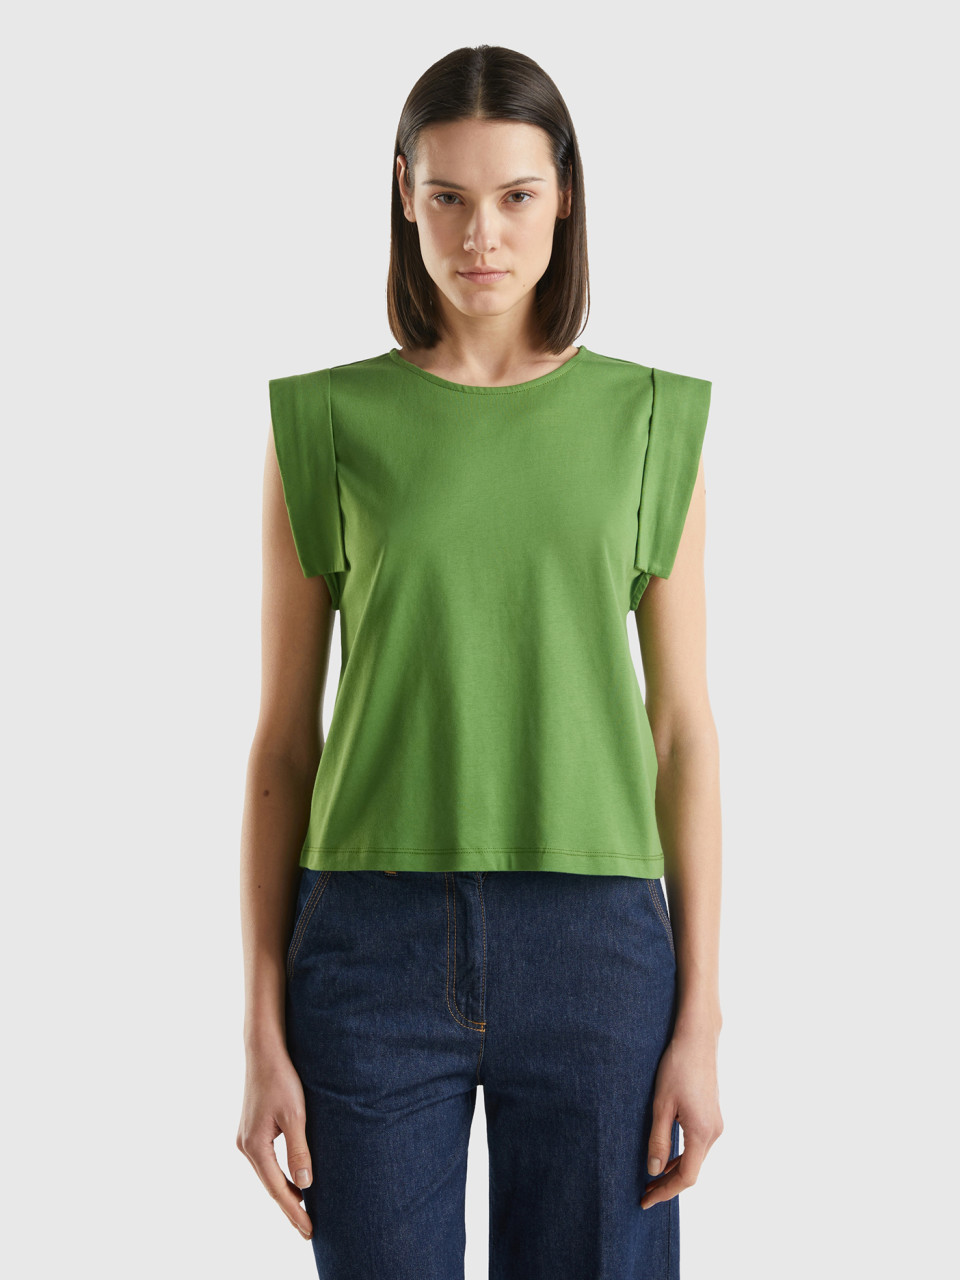 Benetton, T-shirt With Angel Sleeves, Military Green, Women